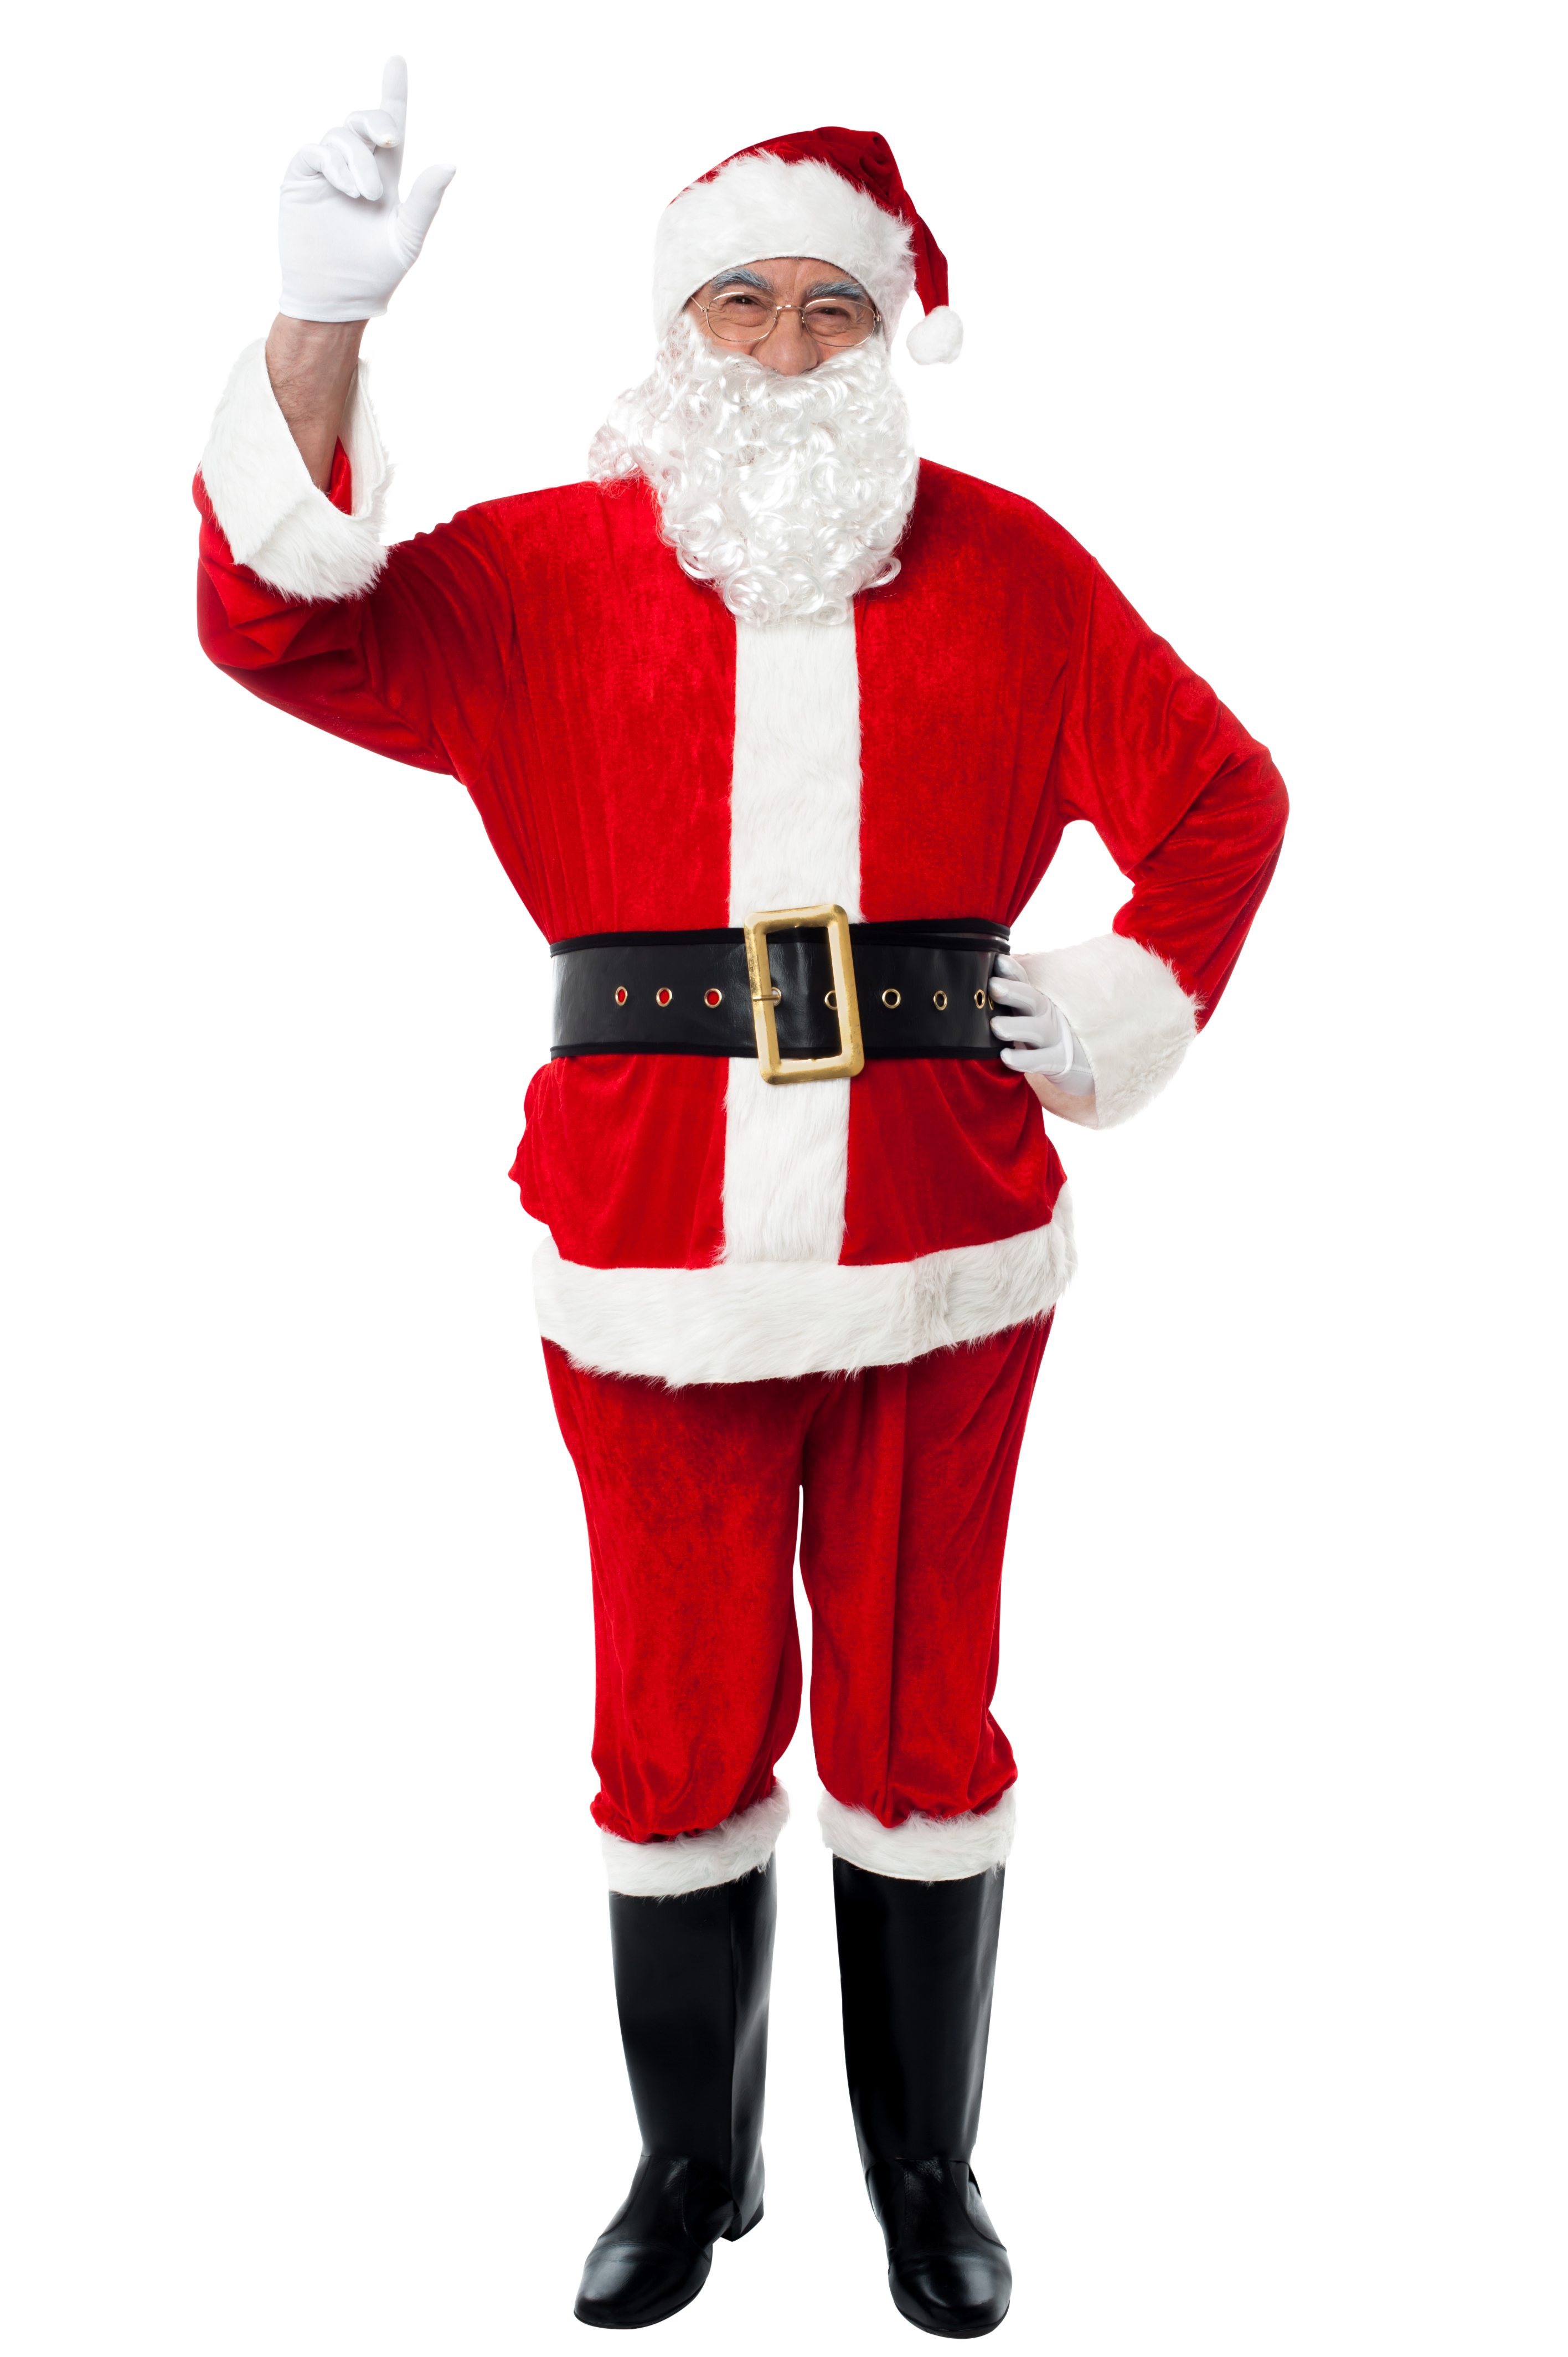 Santa Claus Holding Finger in The Air PNG Image